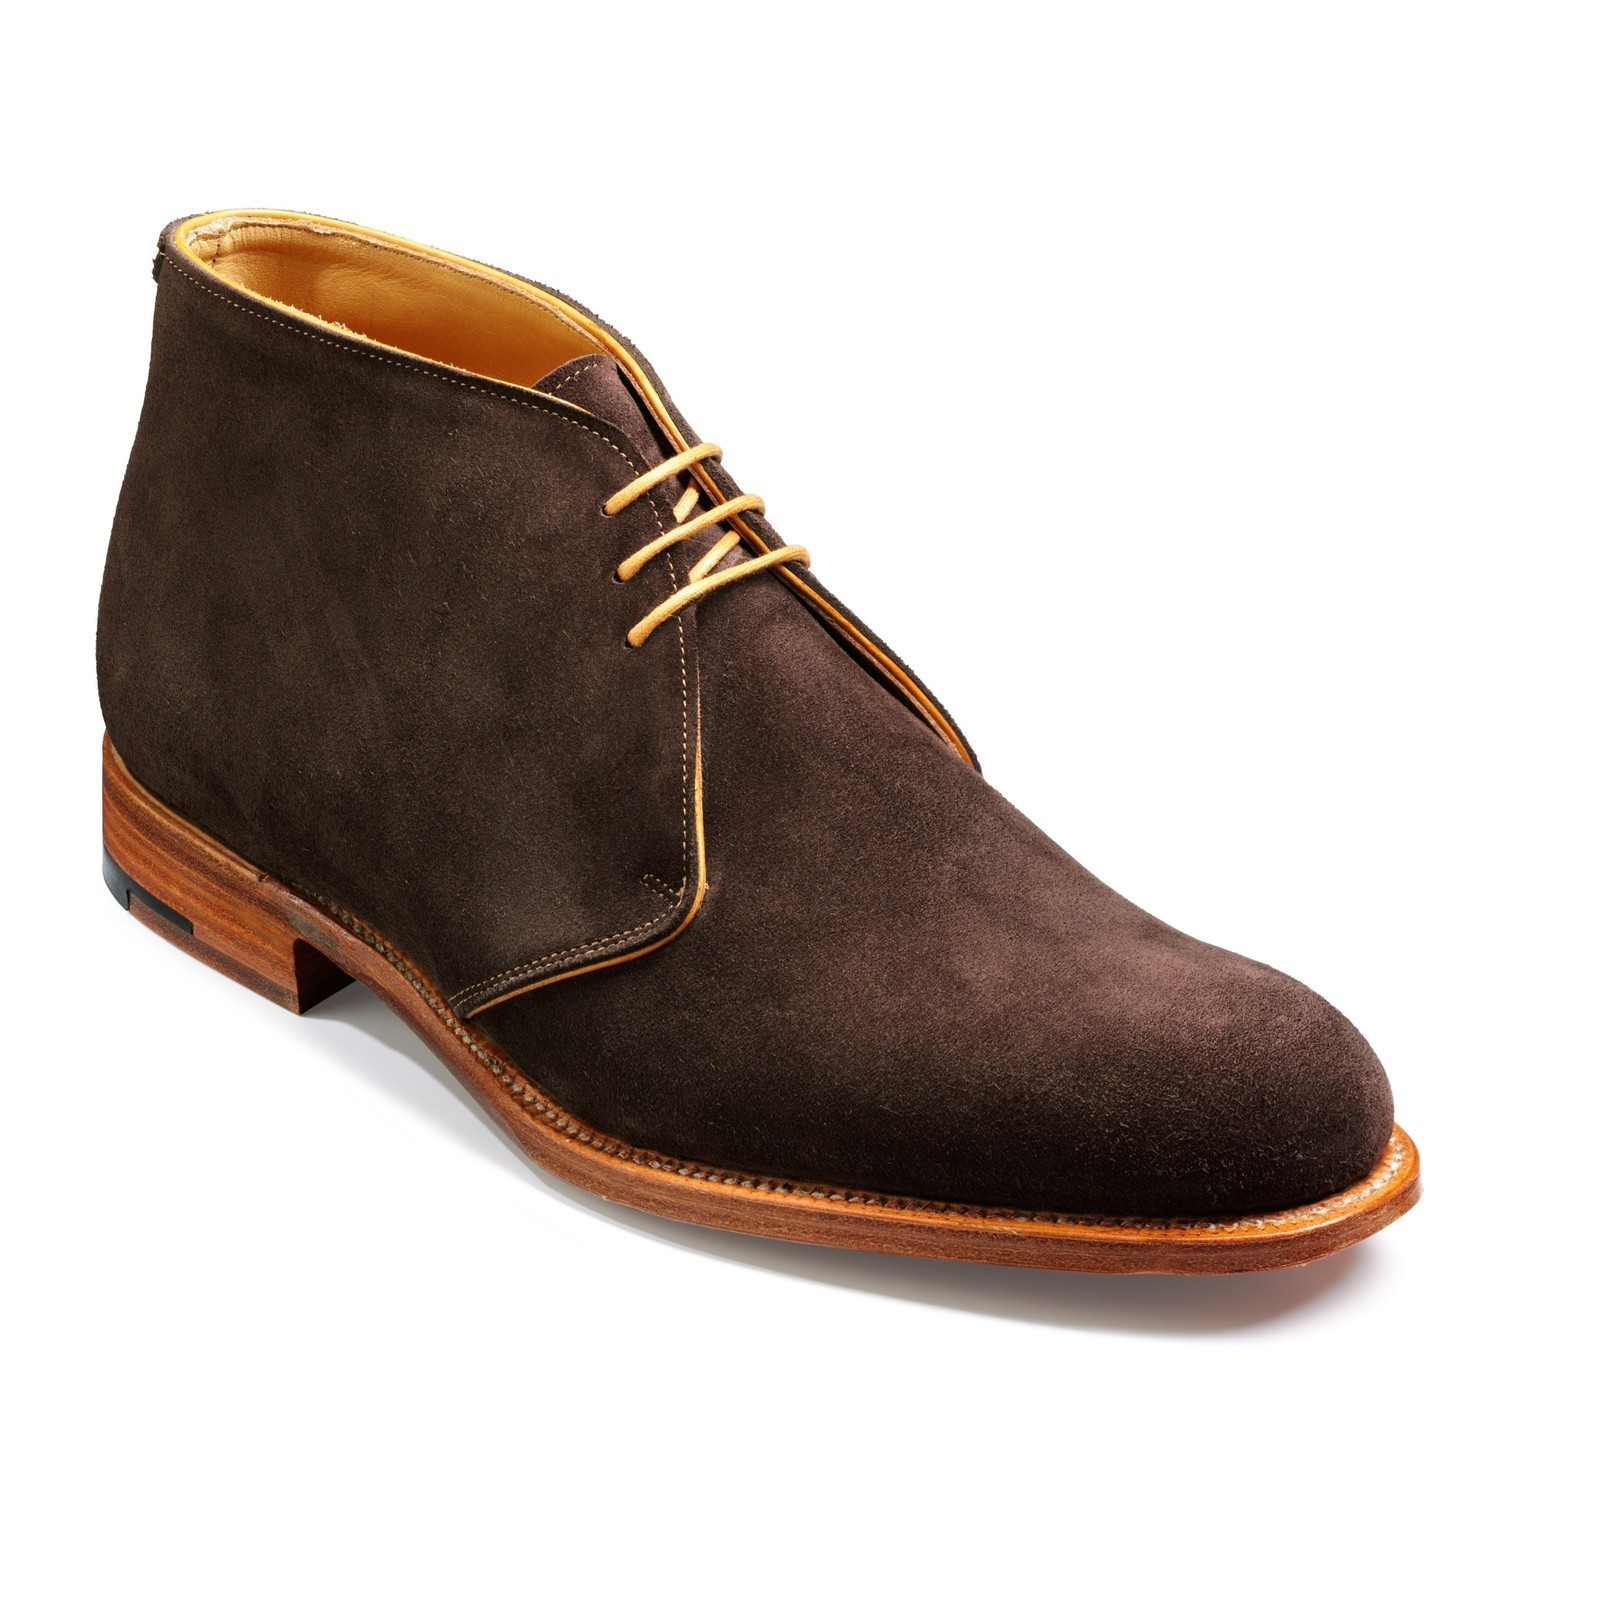 New Men's Handmade chukka boots for men suede leather boots, Men's ...